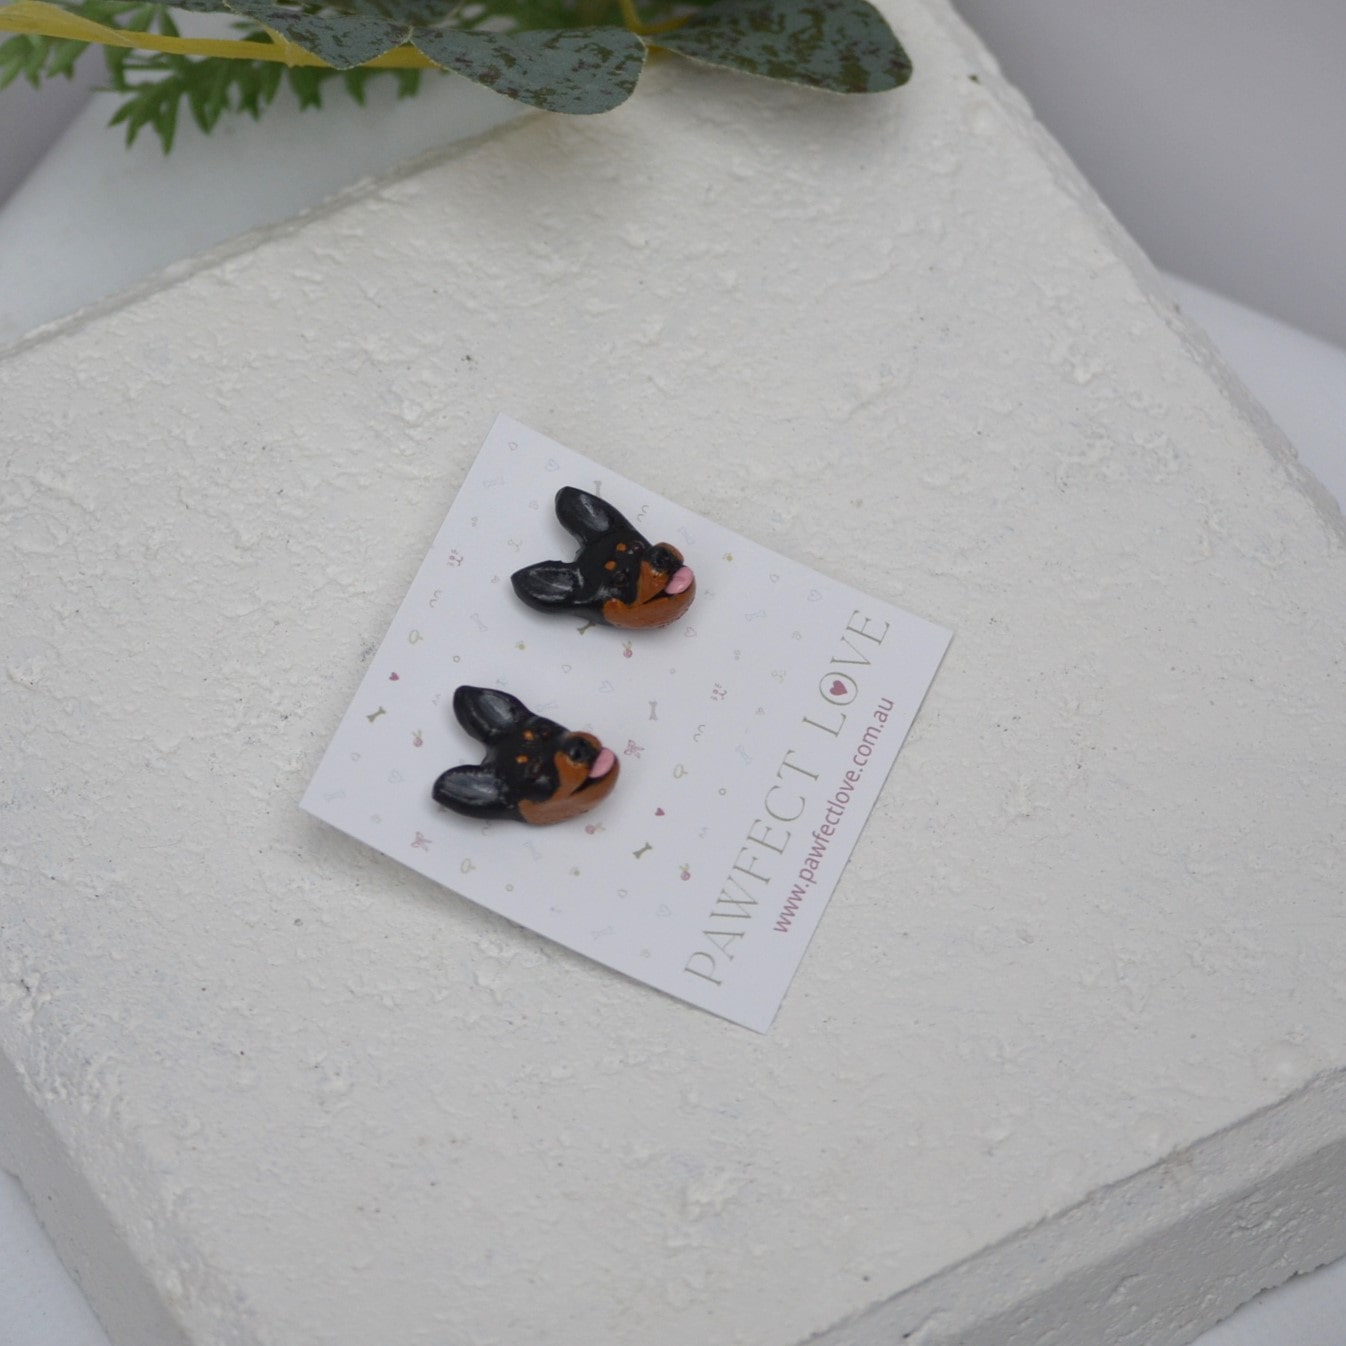 Handmade kelpie stud earrings by Pawfect Love, positioned in front of white paver